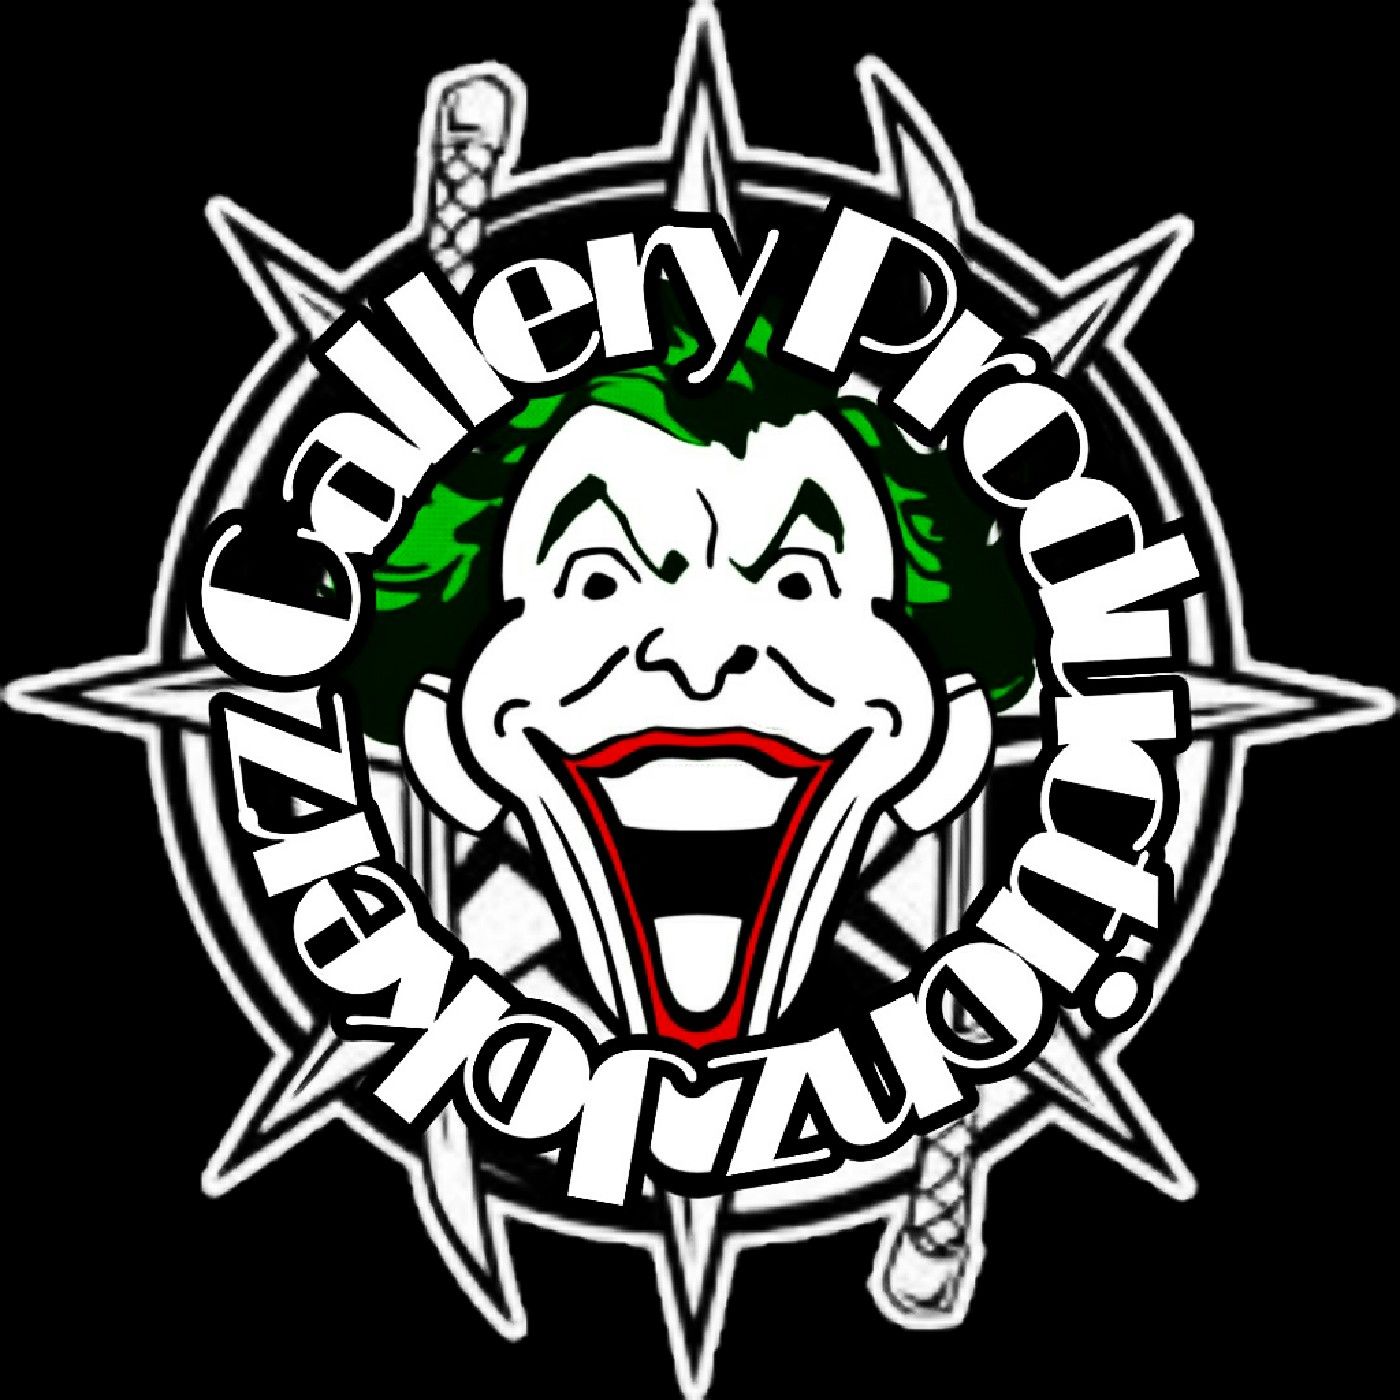 The History of Hallowicked